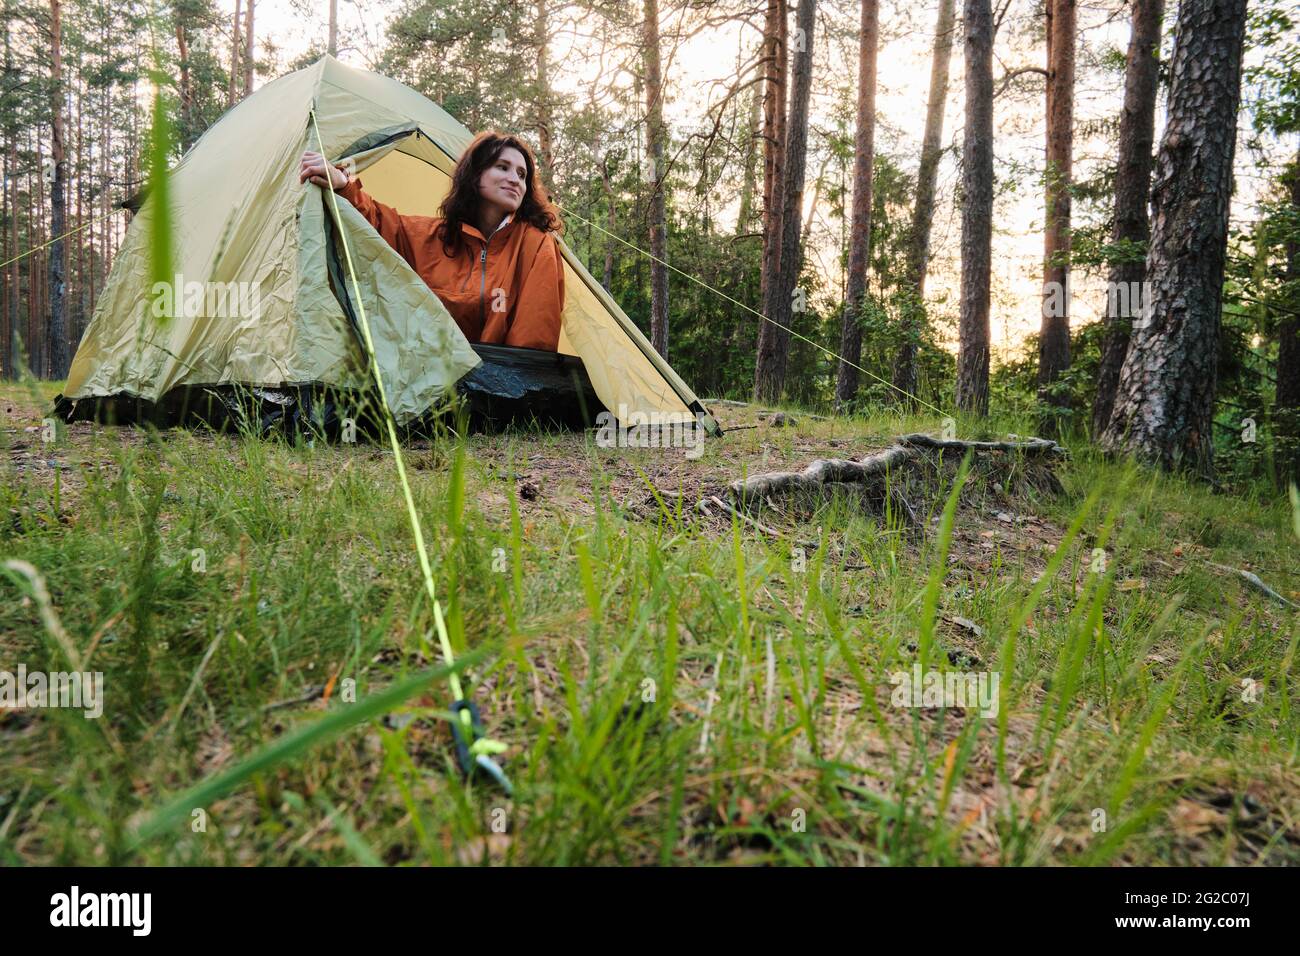 The girl comes out of the tent after sleeping. Travel outside the city in the woods. Camping. Stock Photo